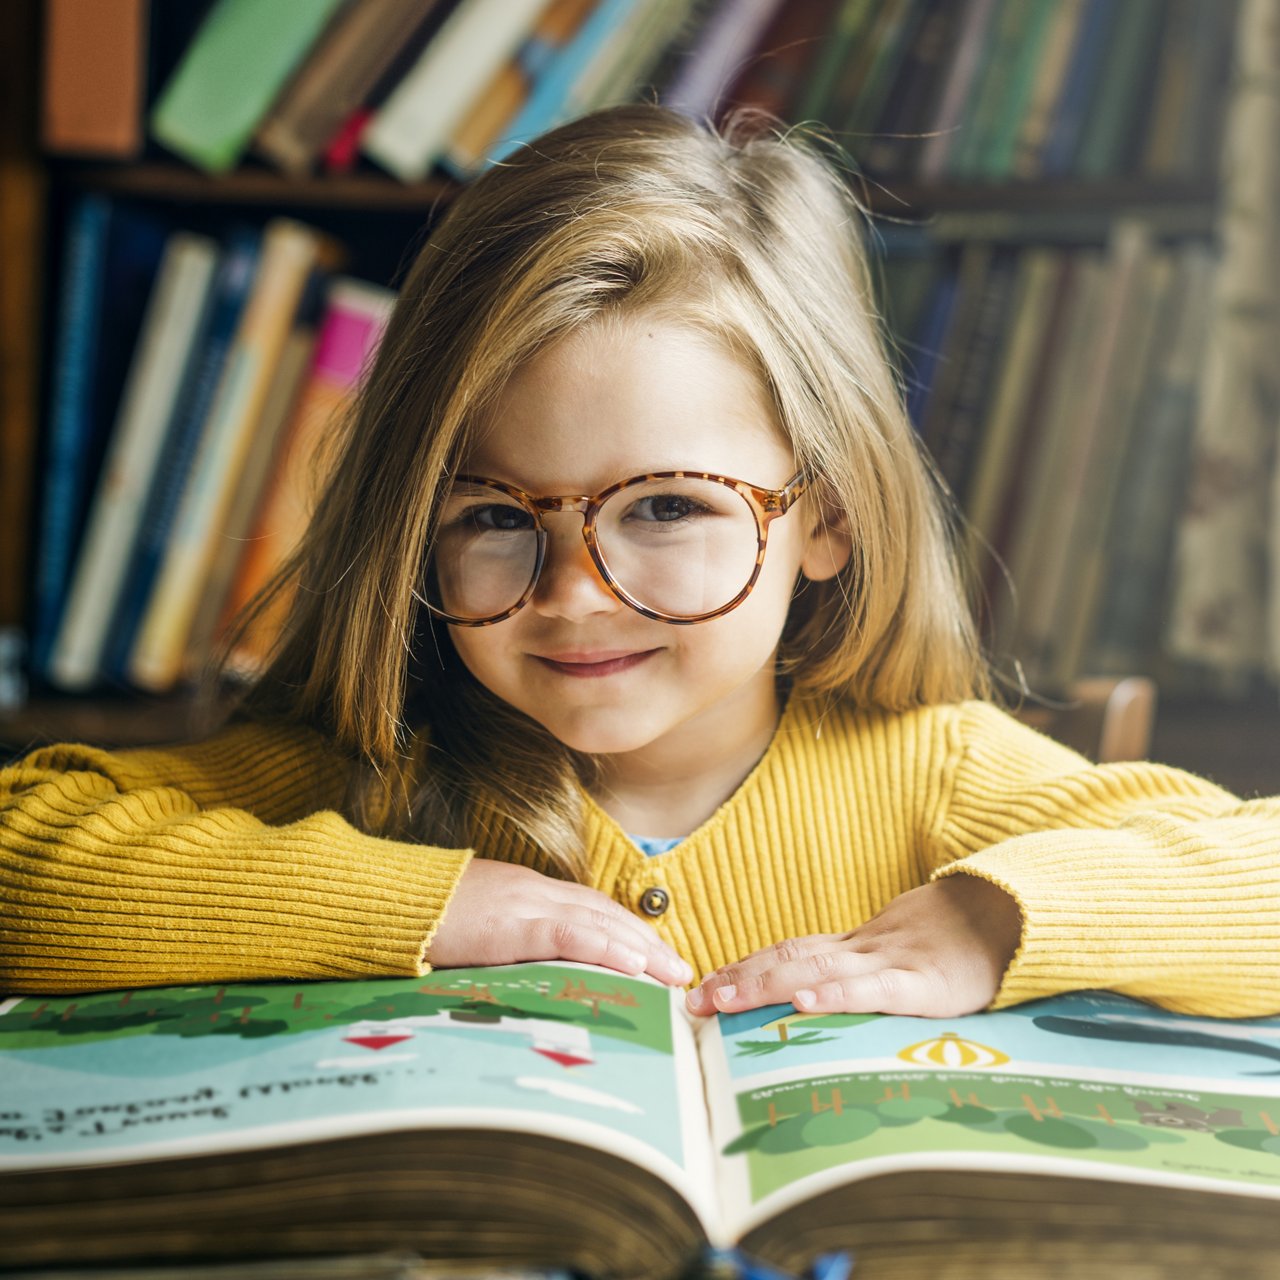 Adorable Cute Girl Reading Storytelling Concept; Shutterstock ID 519884575